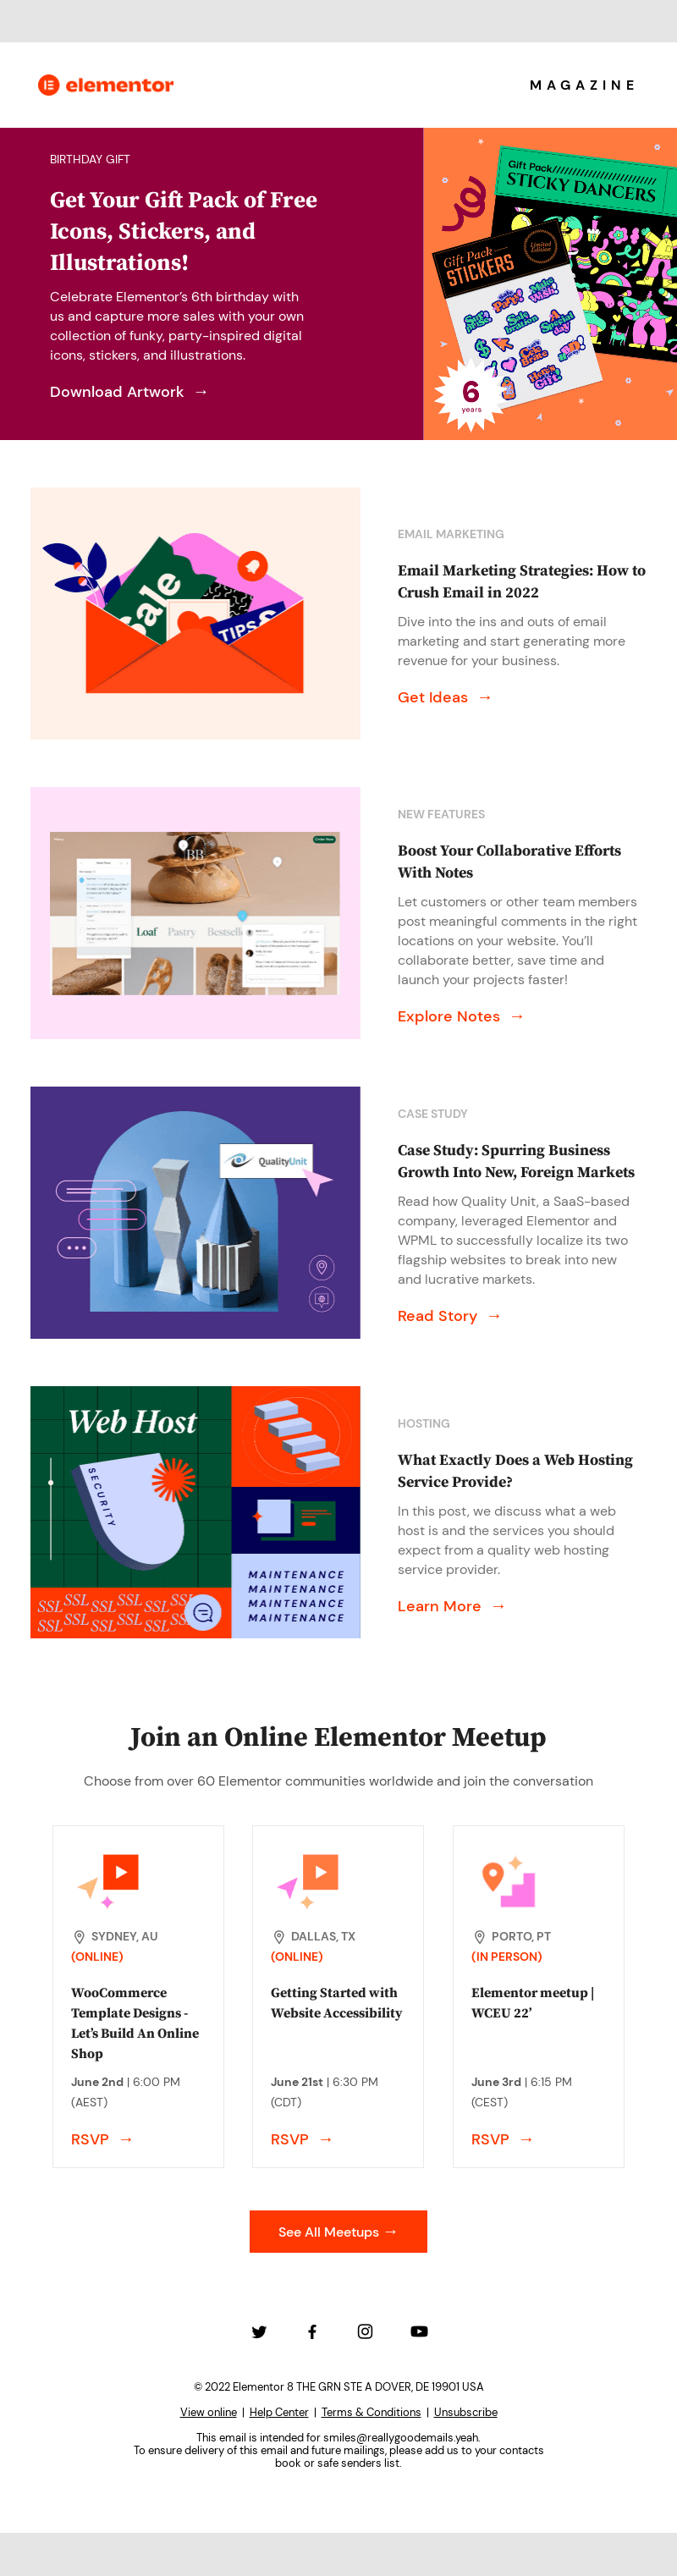 [Magazine] Get Your Digital Gift Pack: Icons, Illustrations & More